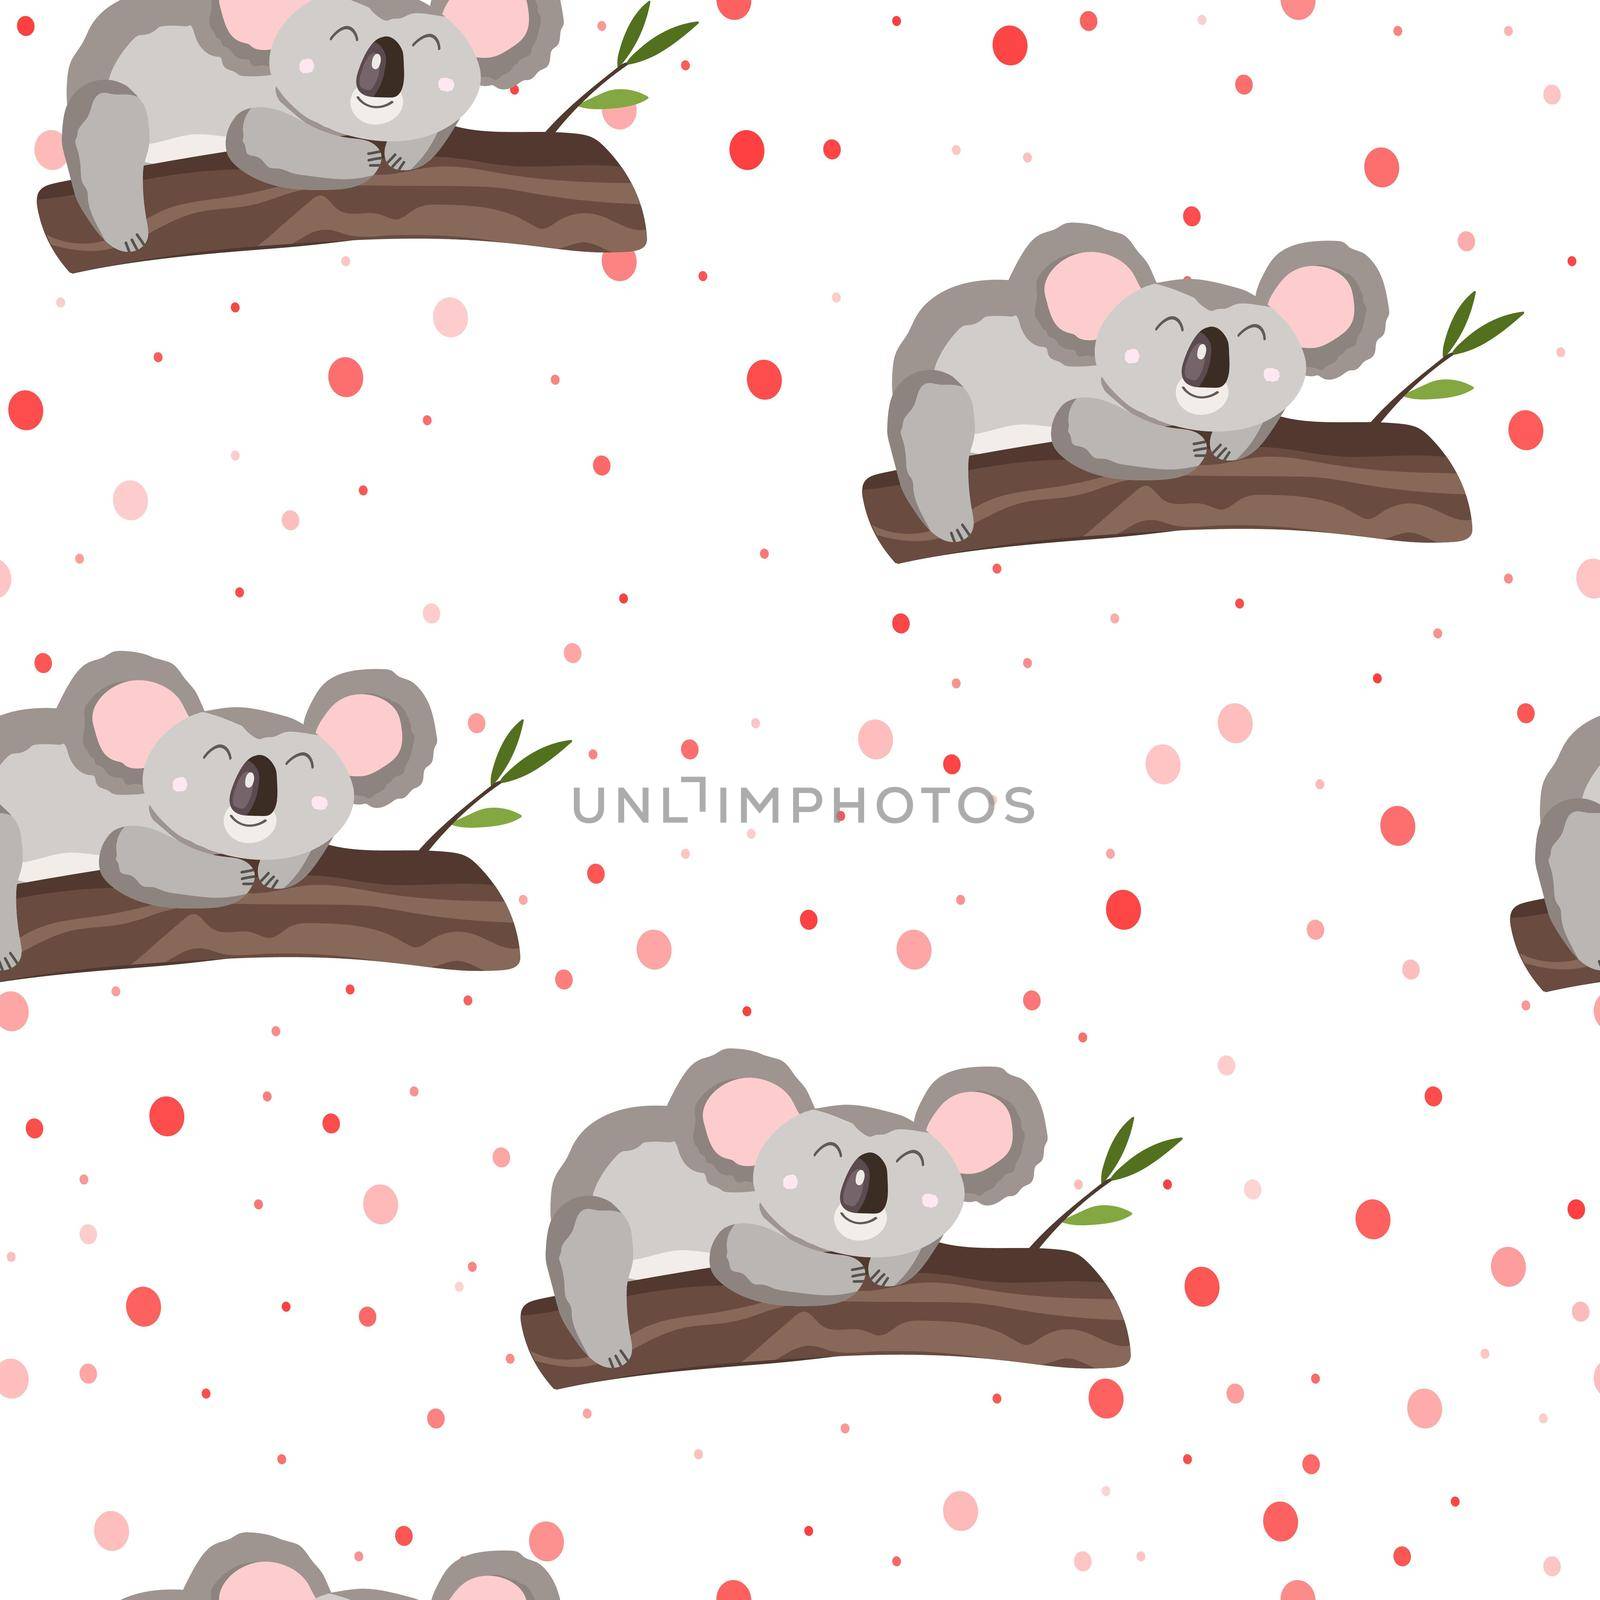 Seamless pattern with cute koala baby and hearts on white polka dots background. Funny australian animals. Card, postcards for kids. Flat vector illustration for fabric, textile, wallpaper, paper